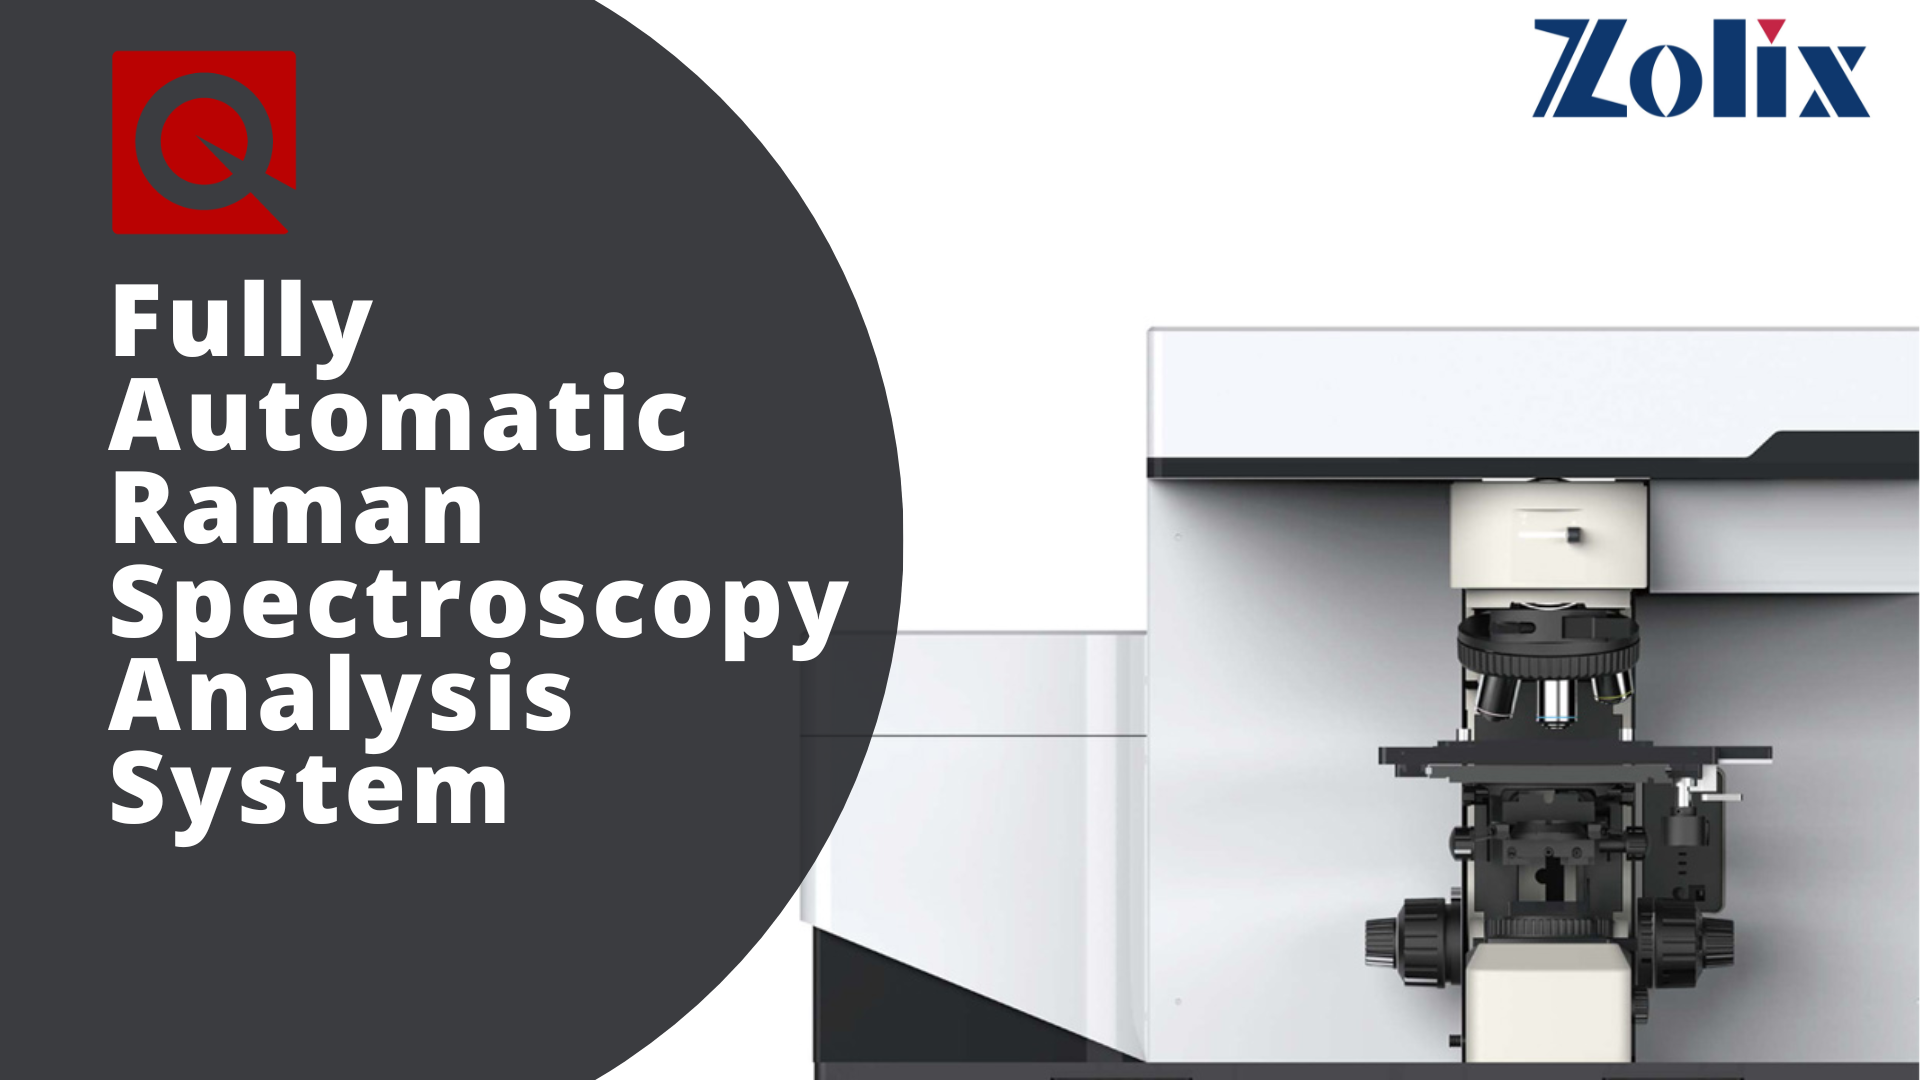 Finder 930 series Fully Automatic Raman Spectroscopy Analysis System